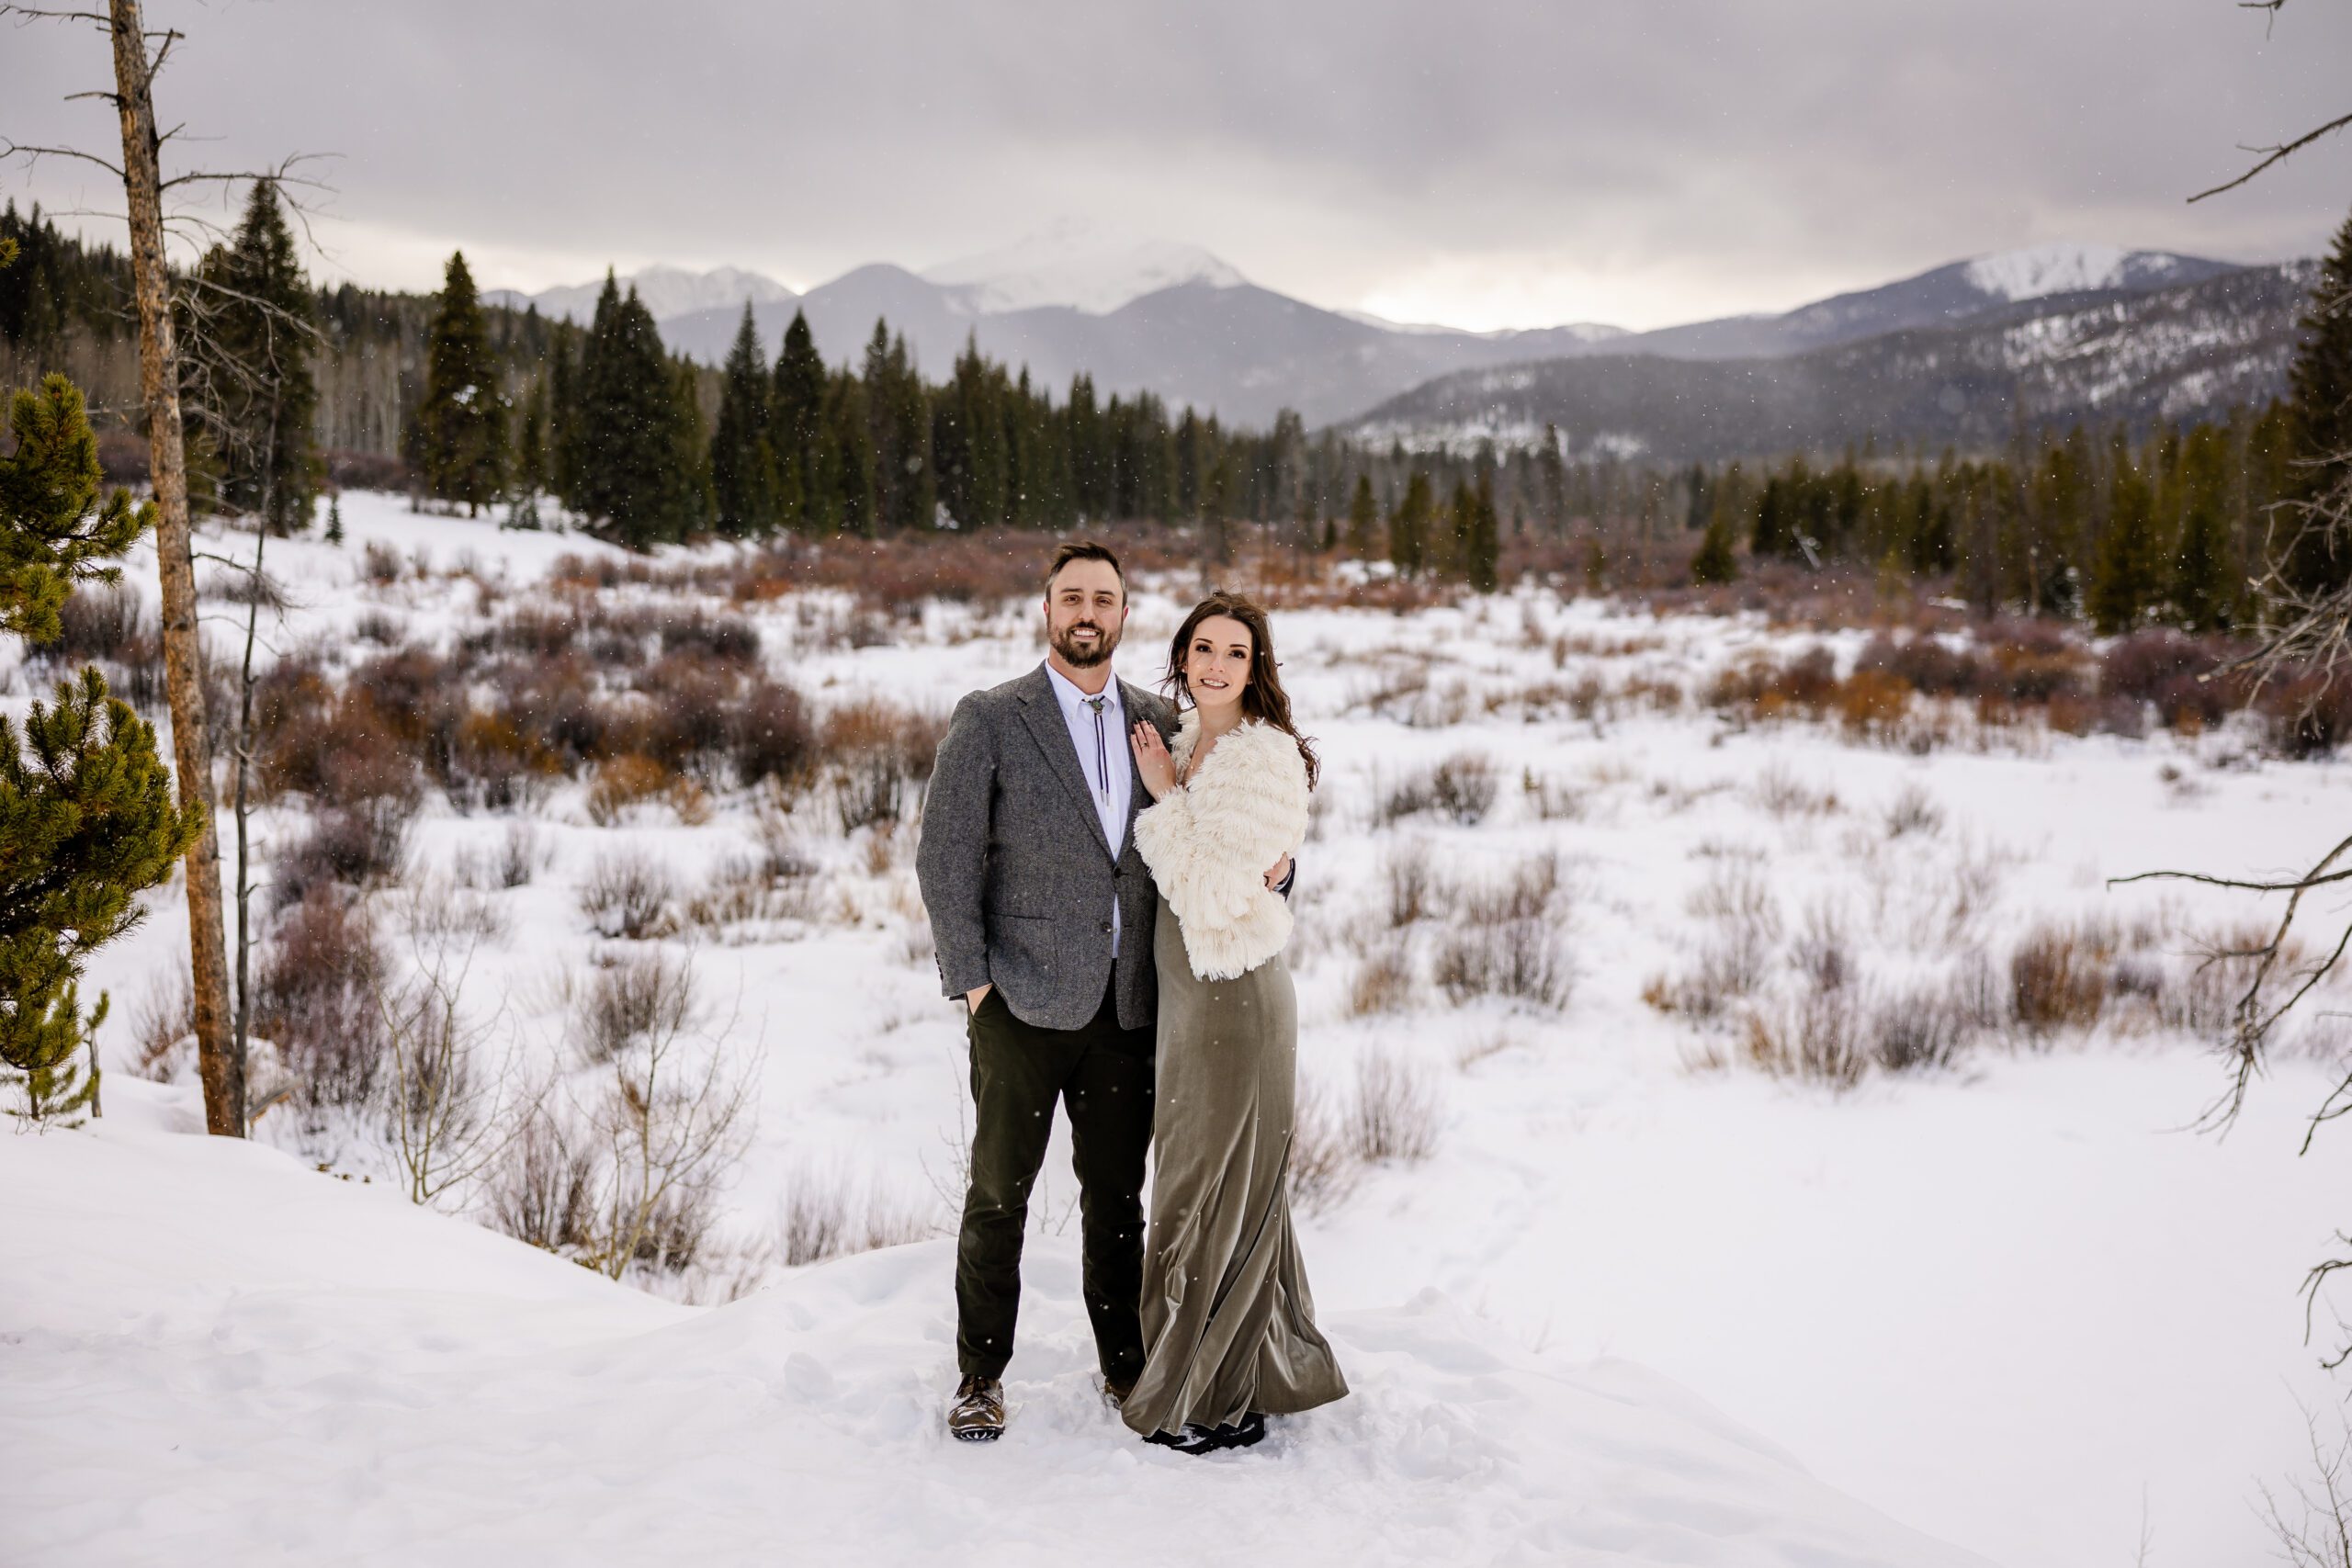 The bride and groom holding each other and smiling at the camera a their Winter Park elopement.